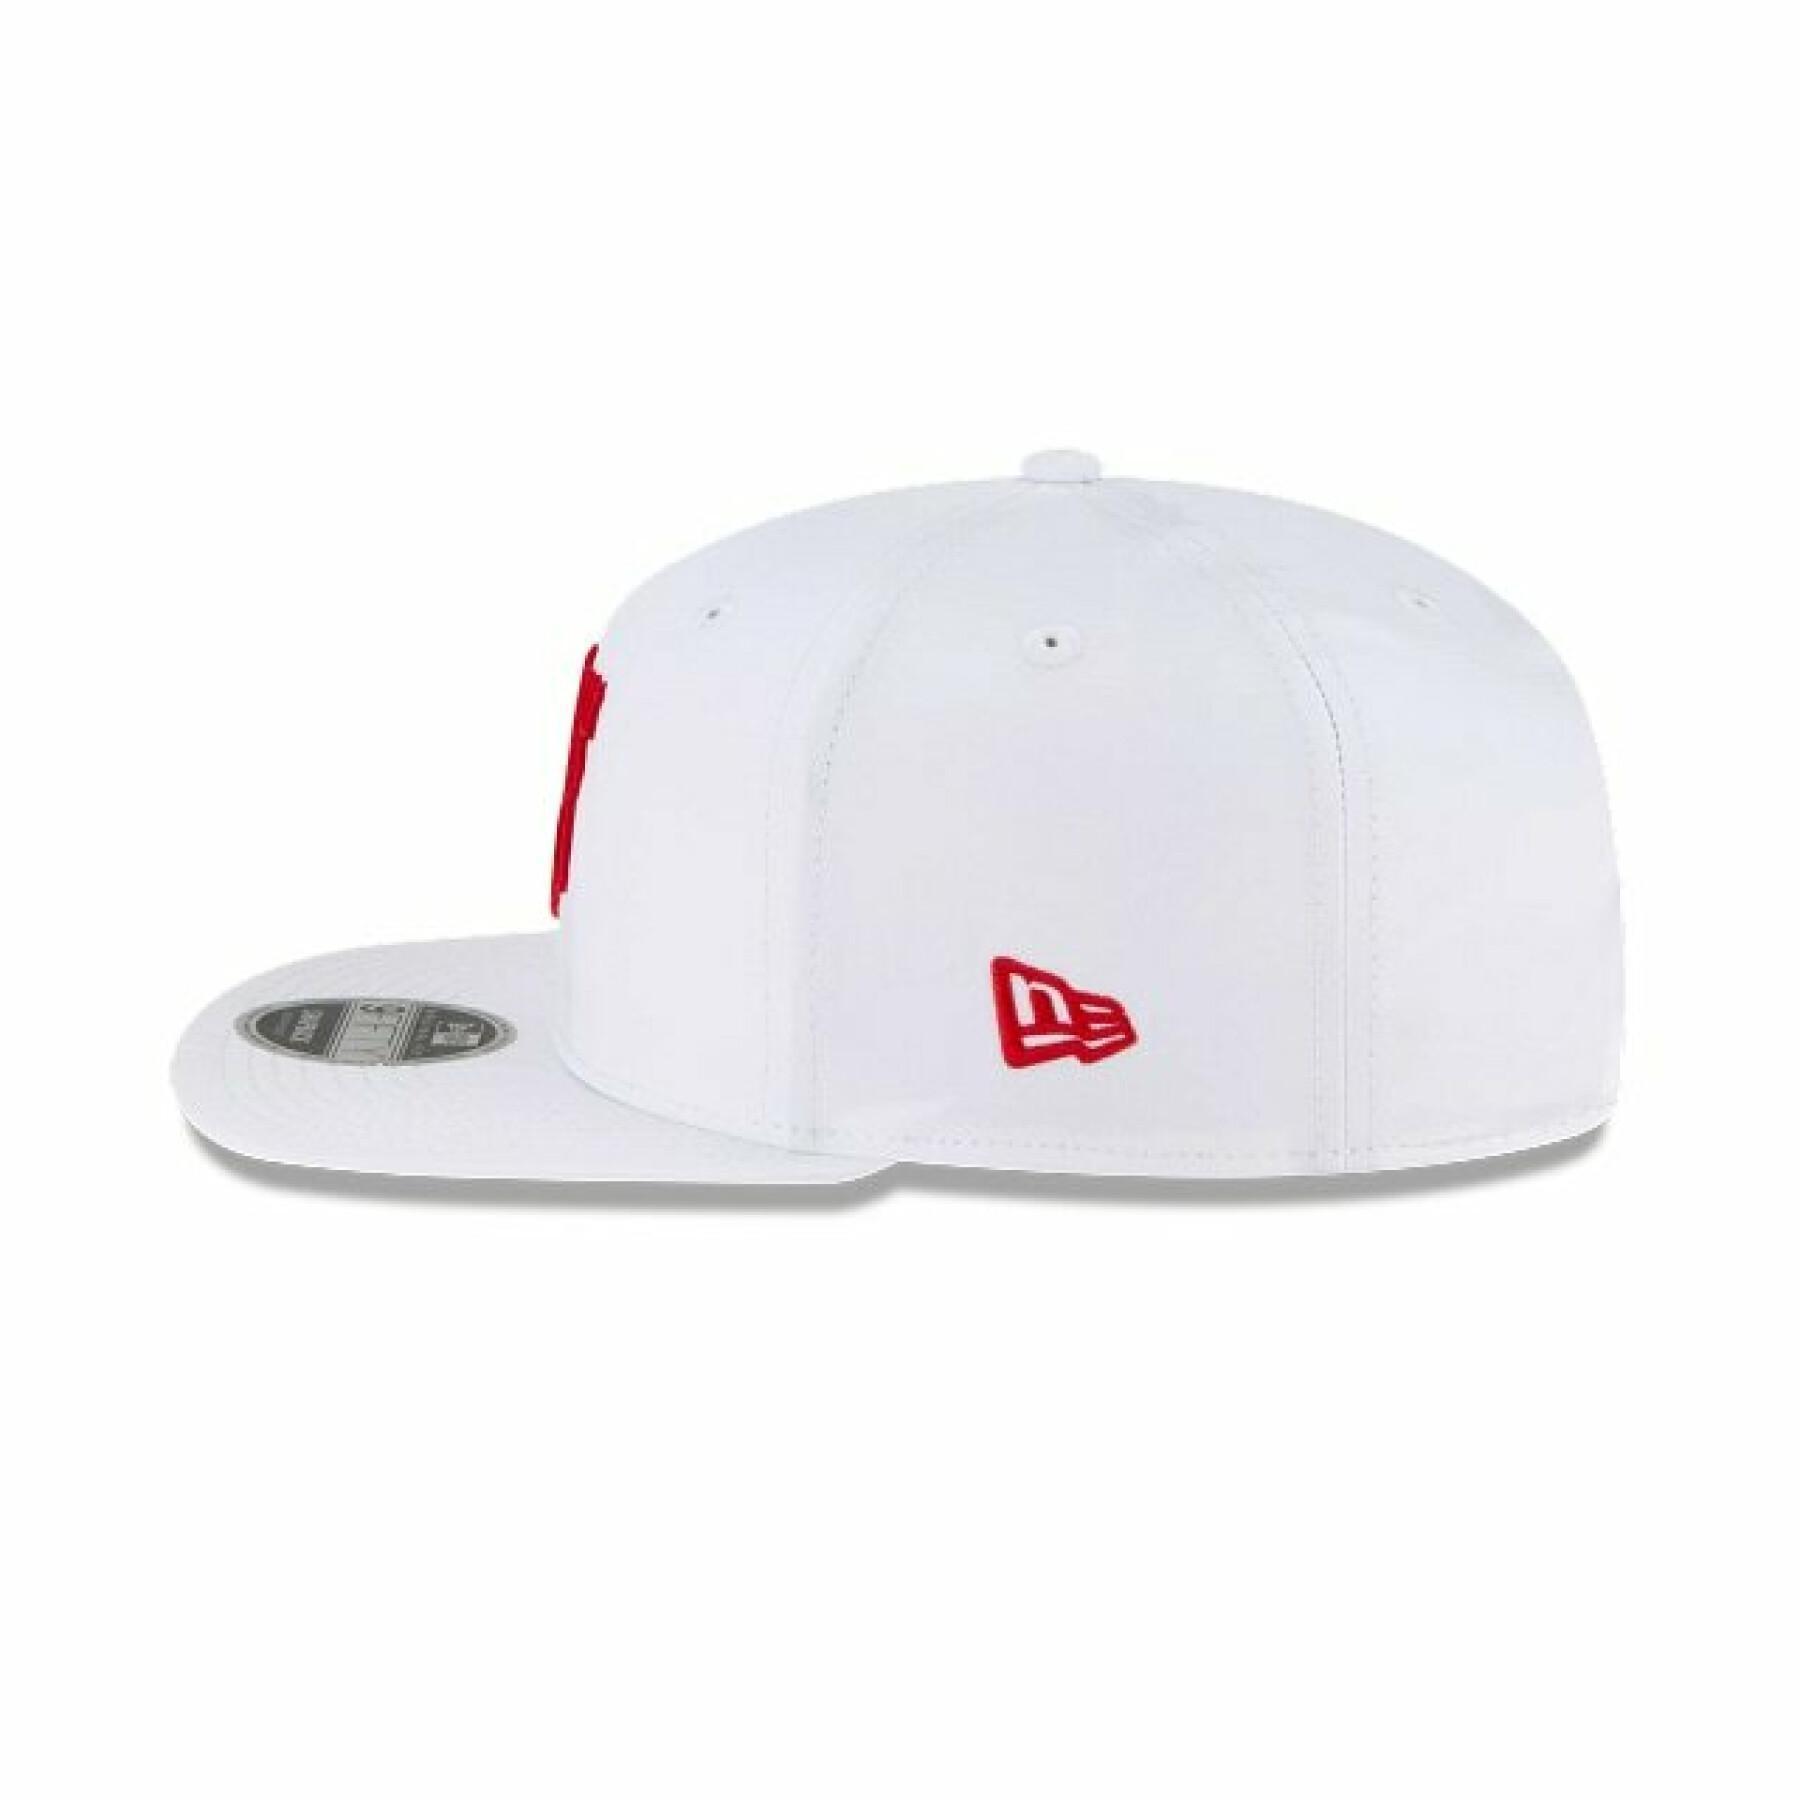 Gorra 9fifty Manchester United 2021/22